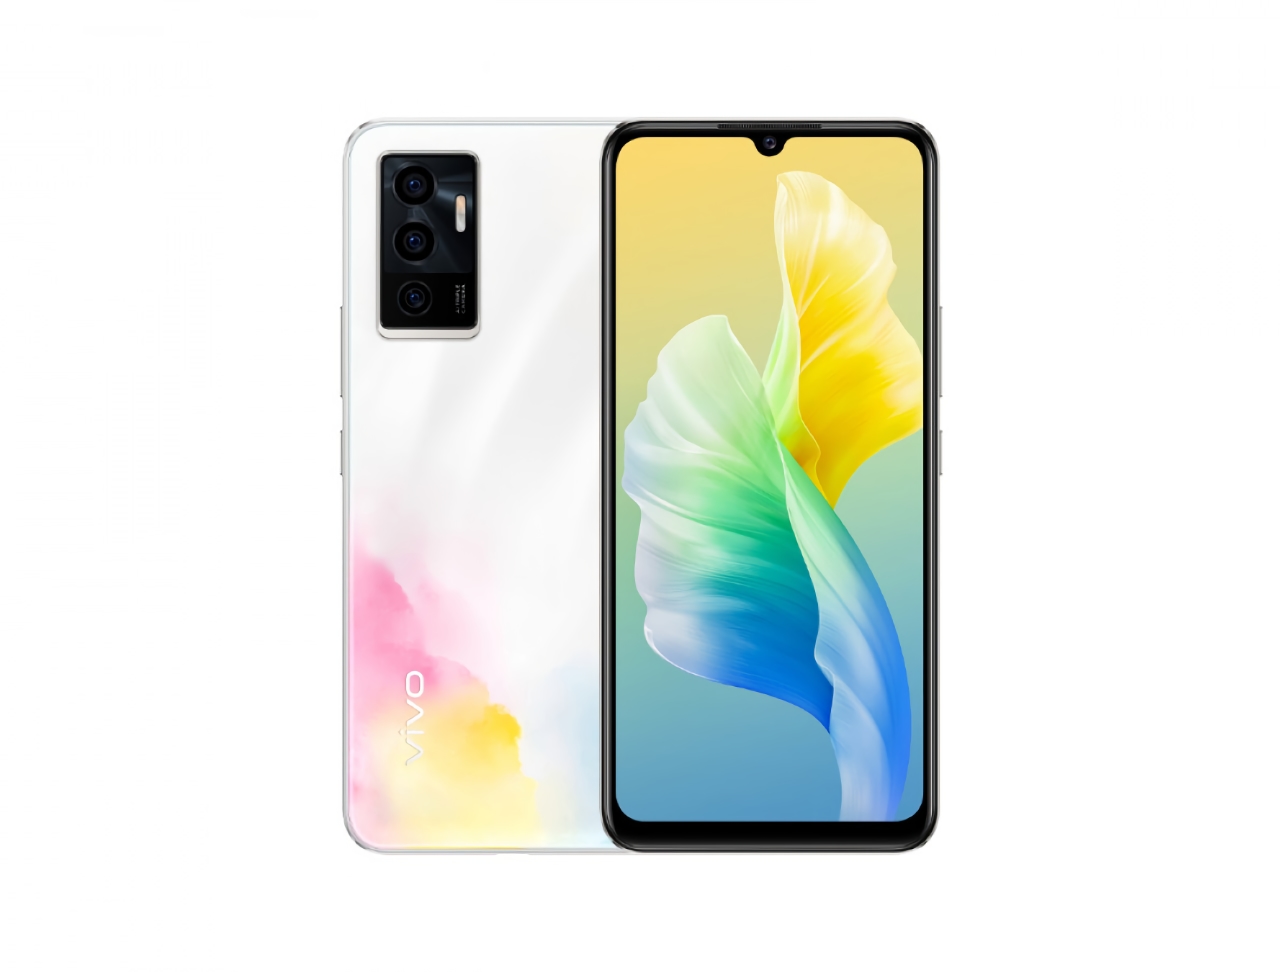 Vivo S10e: 6.4-inch AMOLED screen, MediaTek Dimensity 900 processor and 4,000mAh battery with 44W fast charging for $373